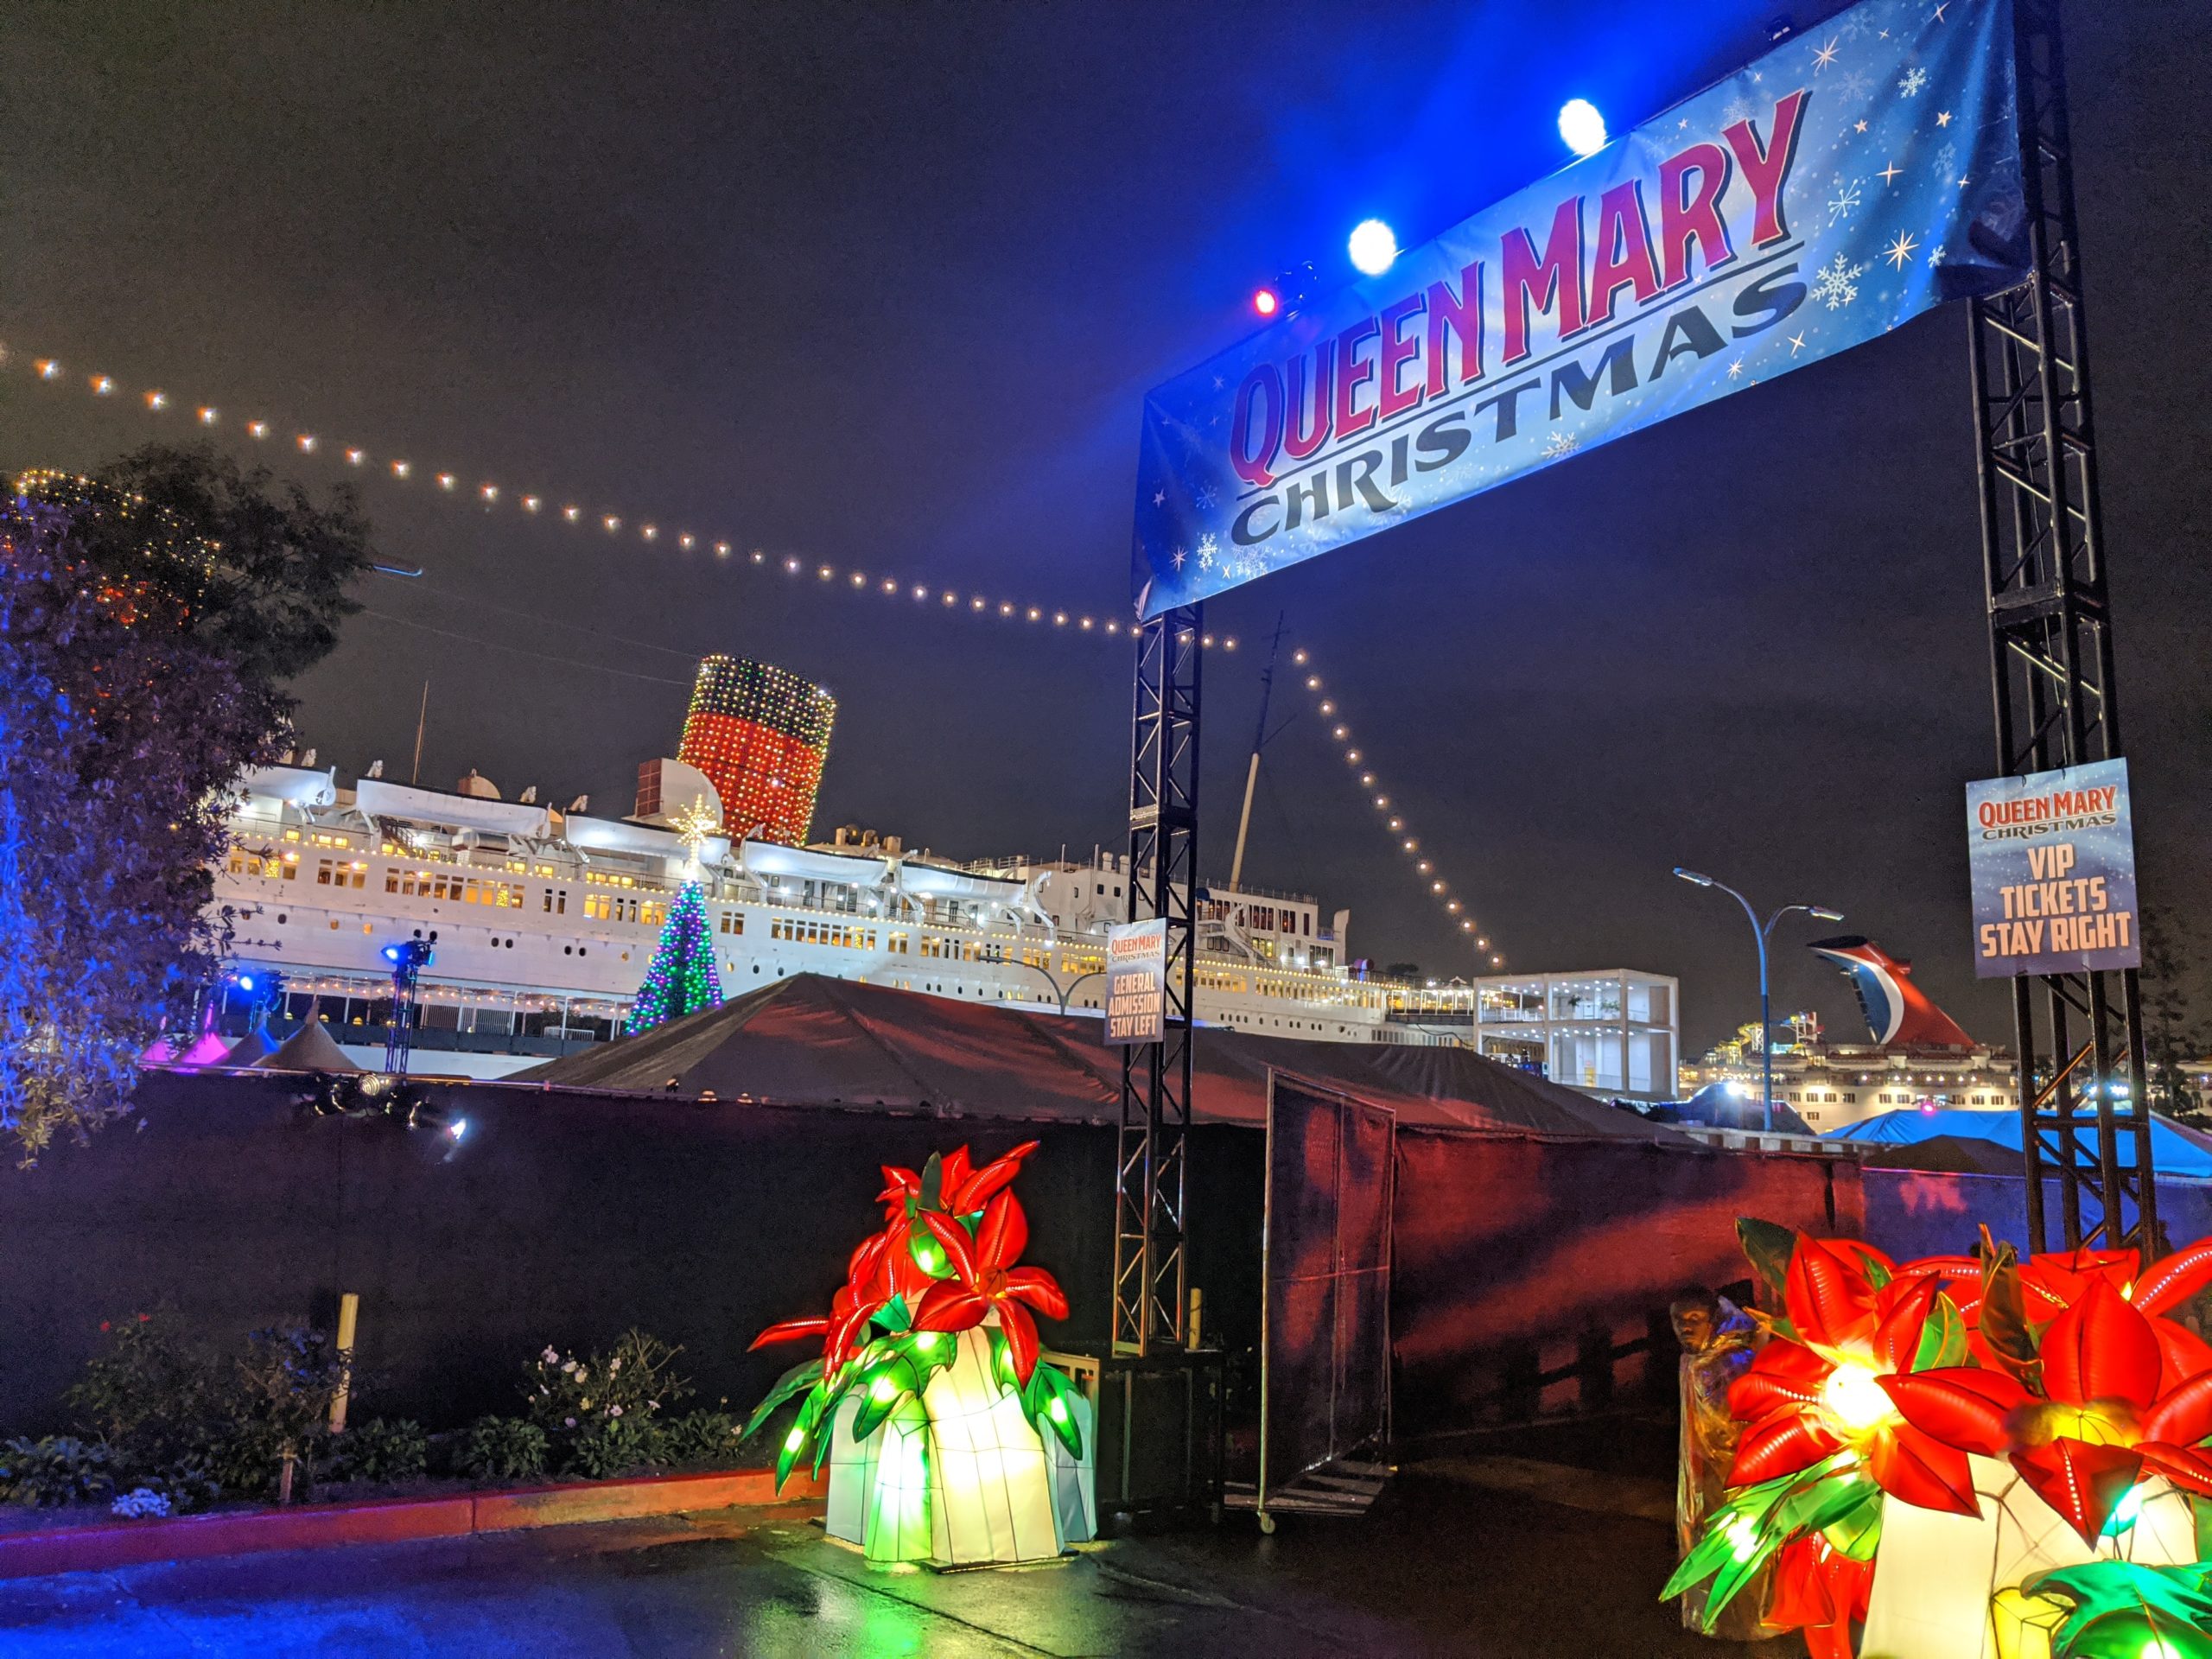 The holidays are setting sail at the QUEEN MARY CHRISTMAS HorrorBuzz